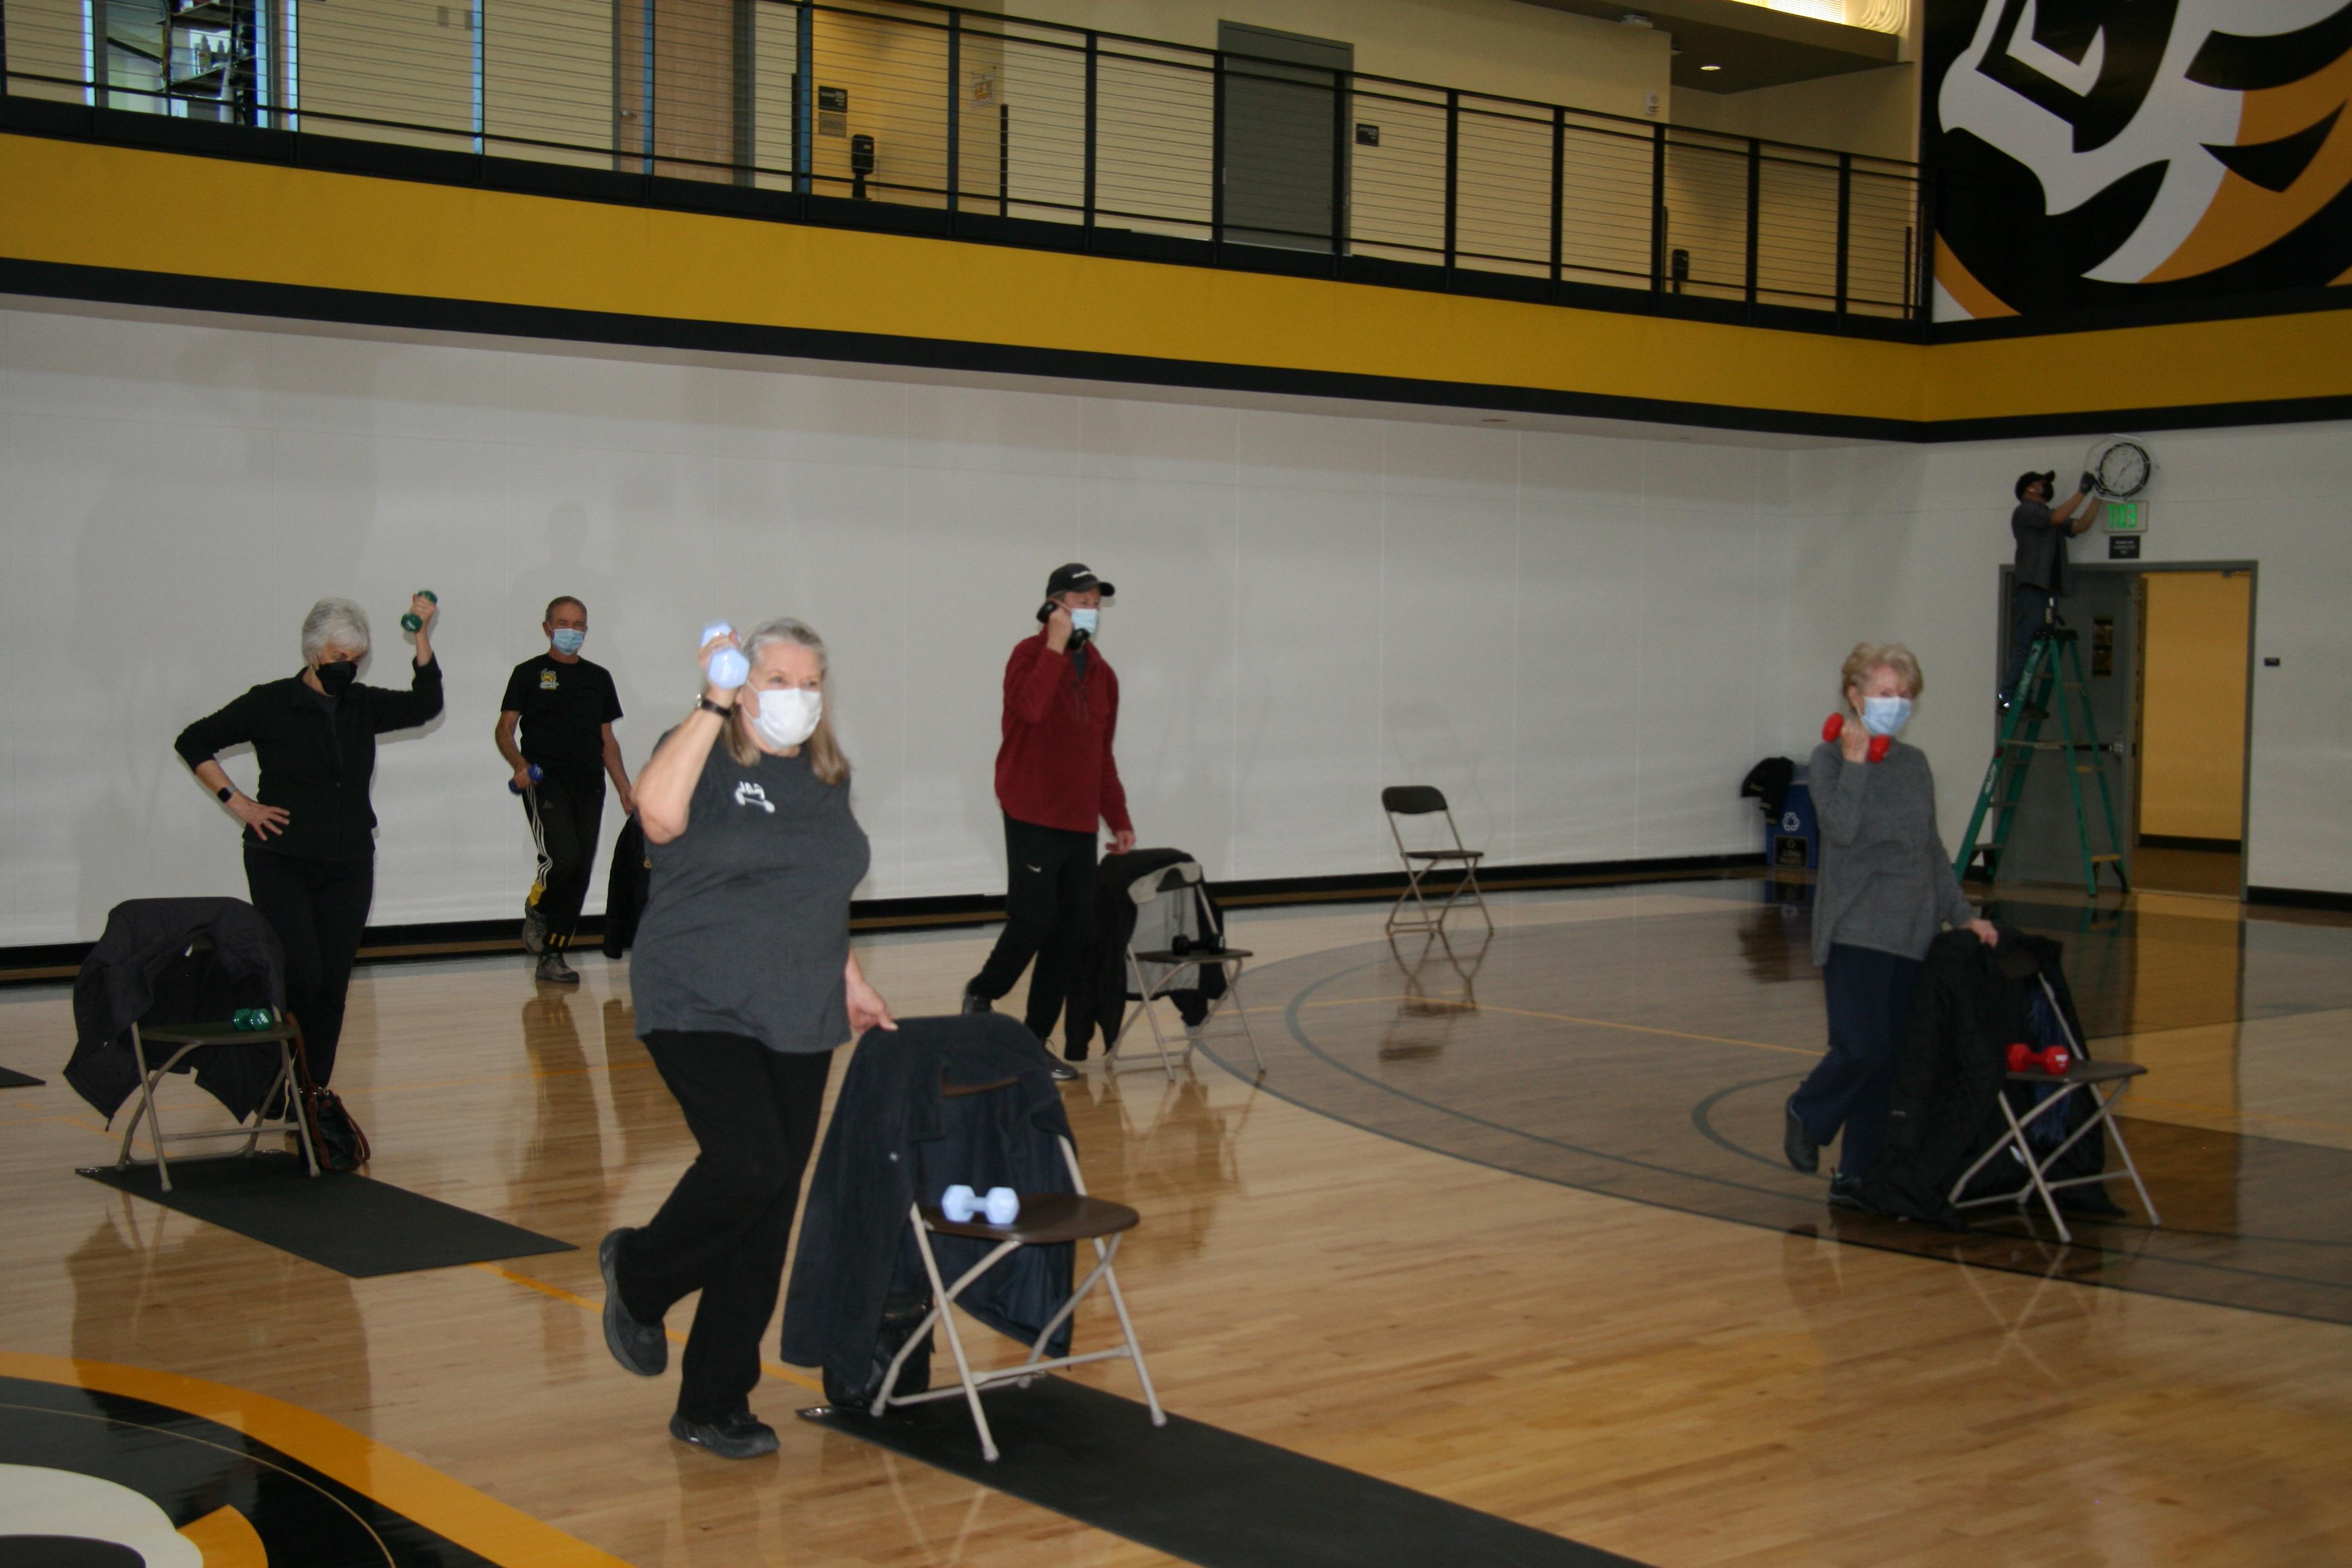 Fit 4 Life participants doing group exercises <span class="cc-gallery-credit"></span>